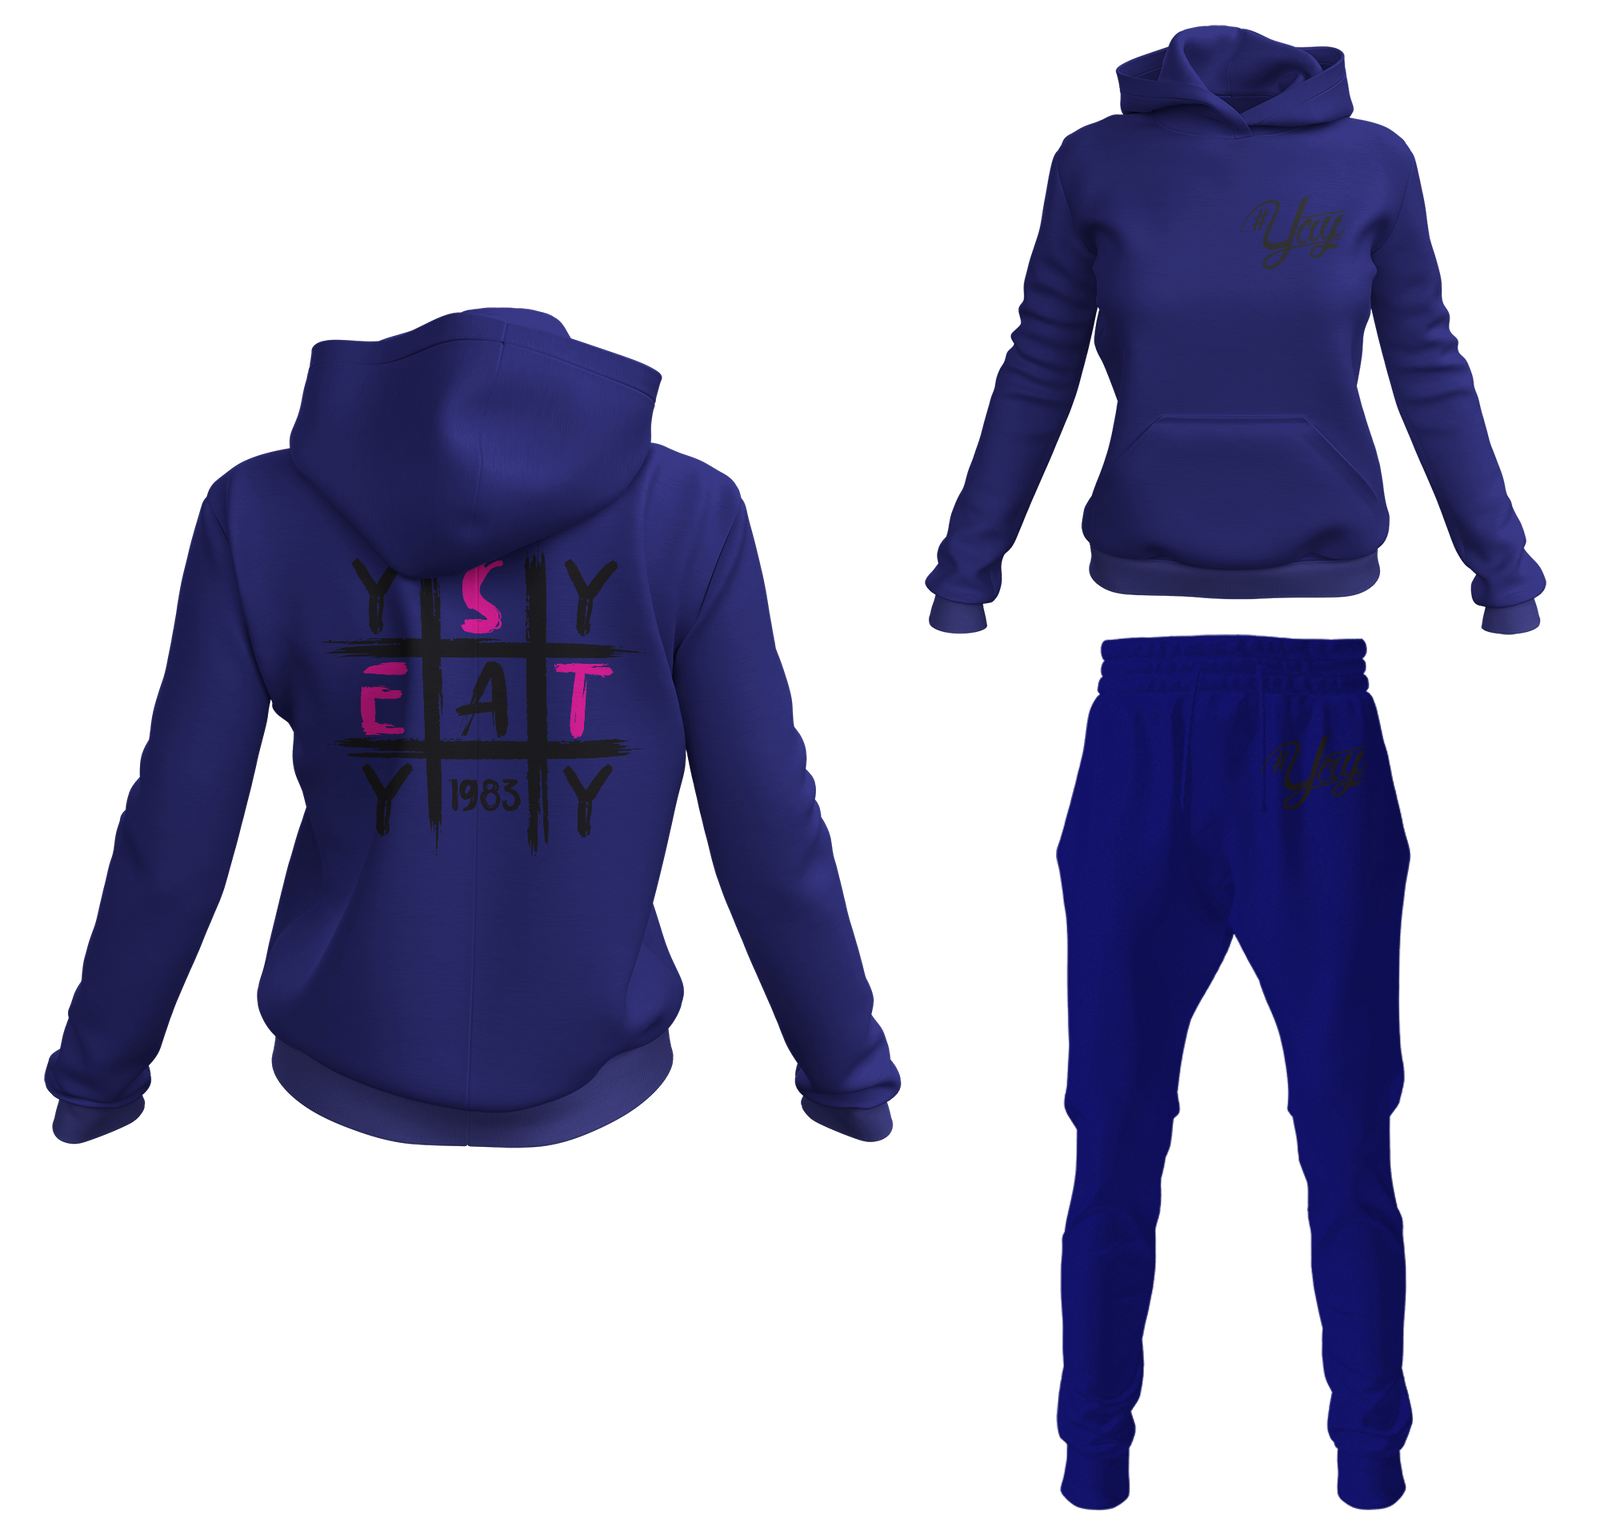 Women's Tic Tac Yay Pullover Sweatsuits